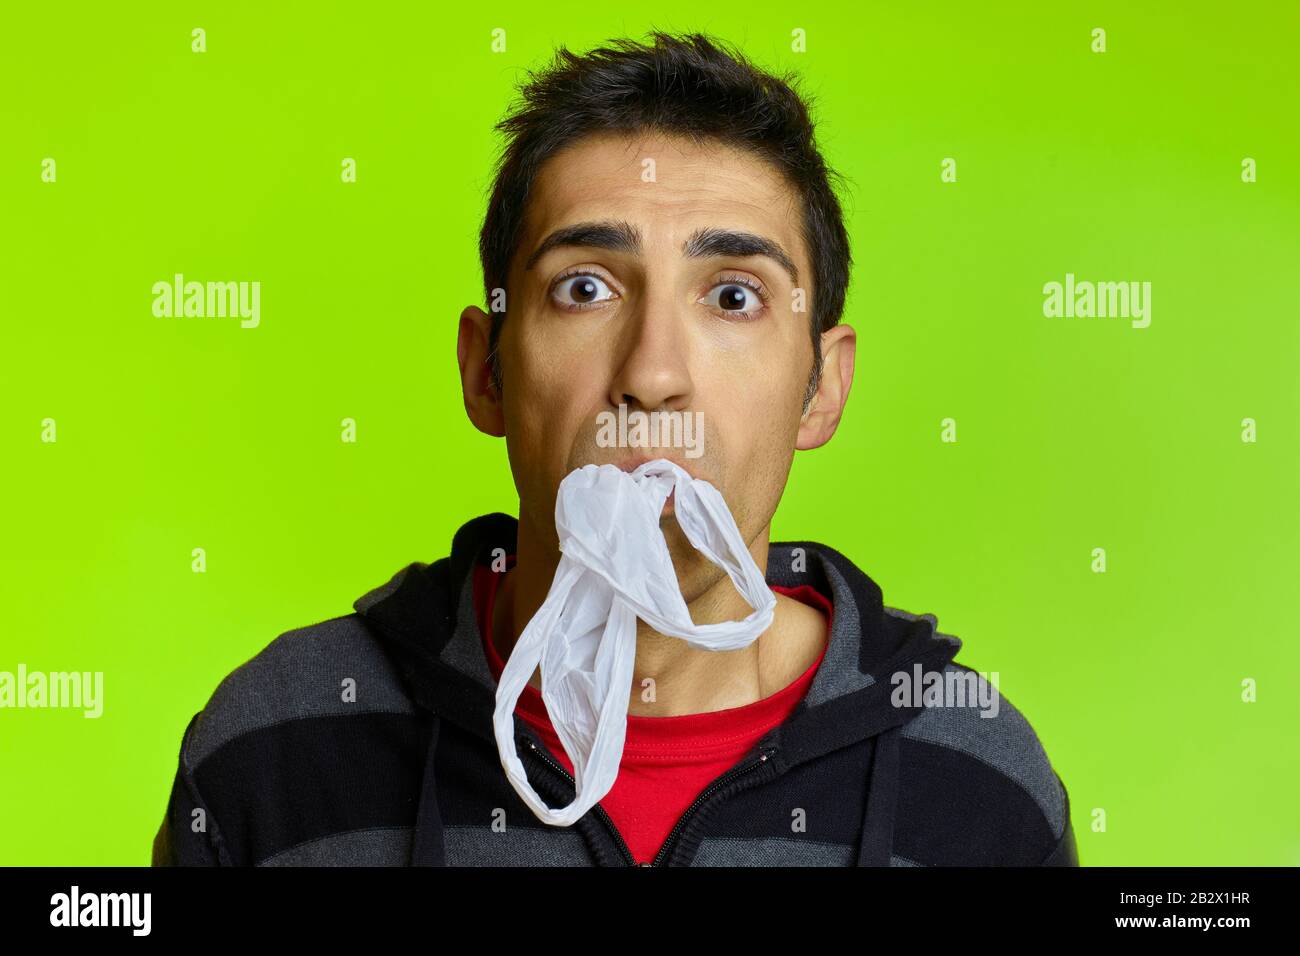 A choked man with a plastic bag in his mouth in front of a green background Stock Photo